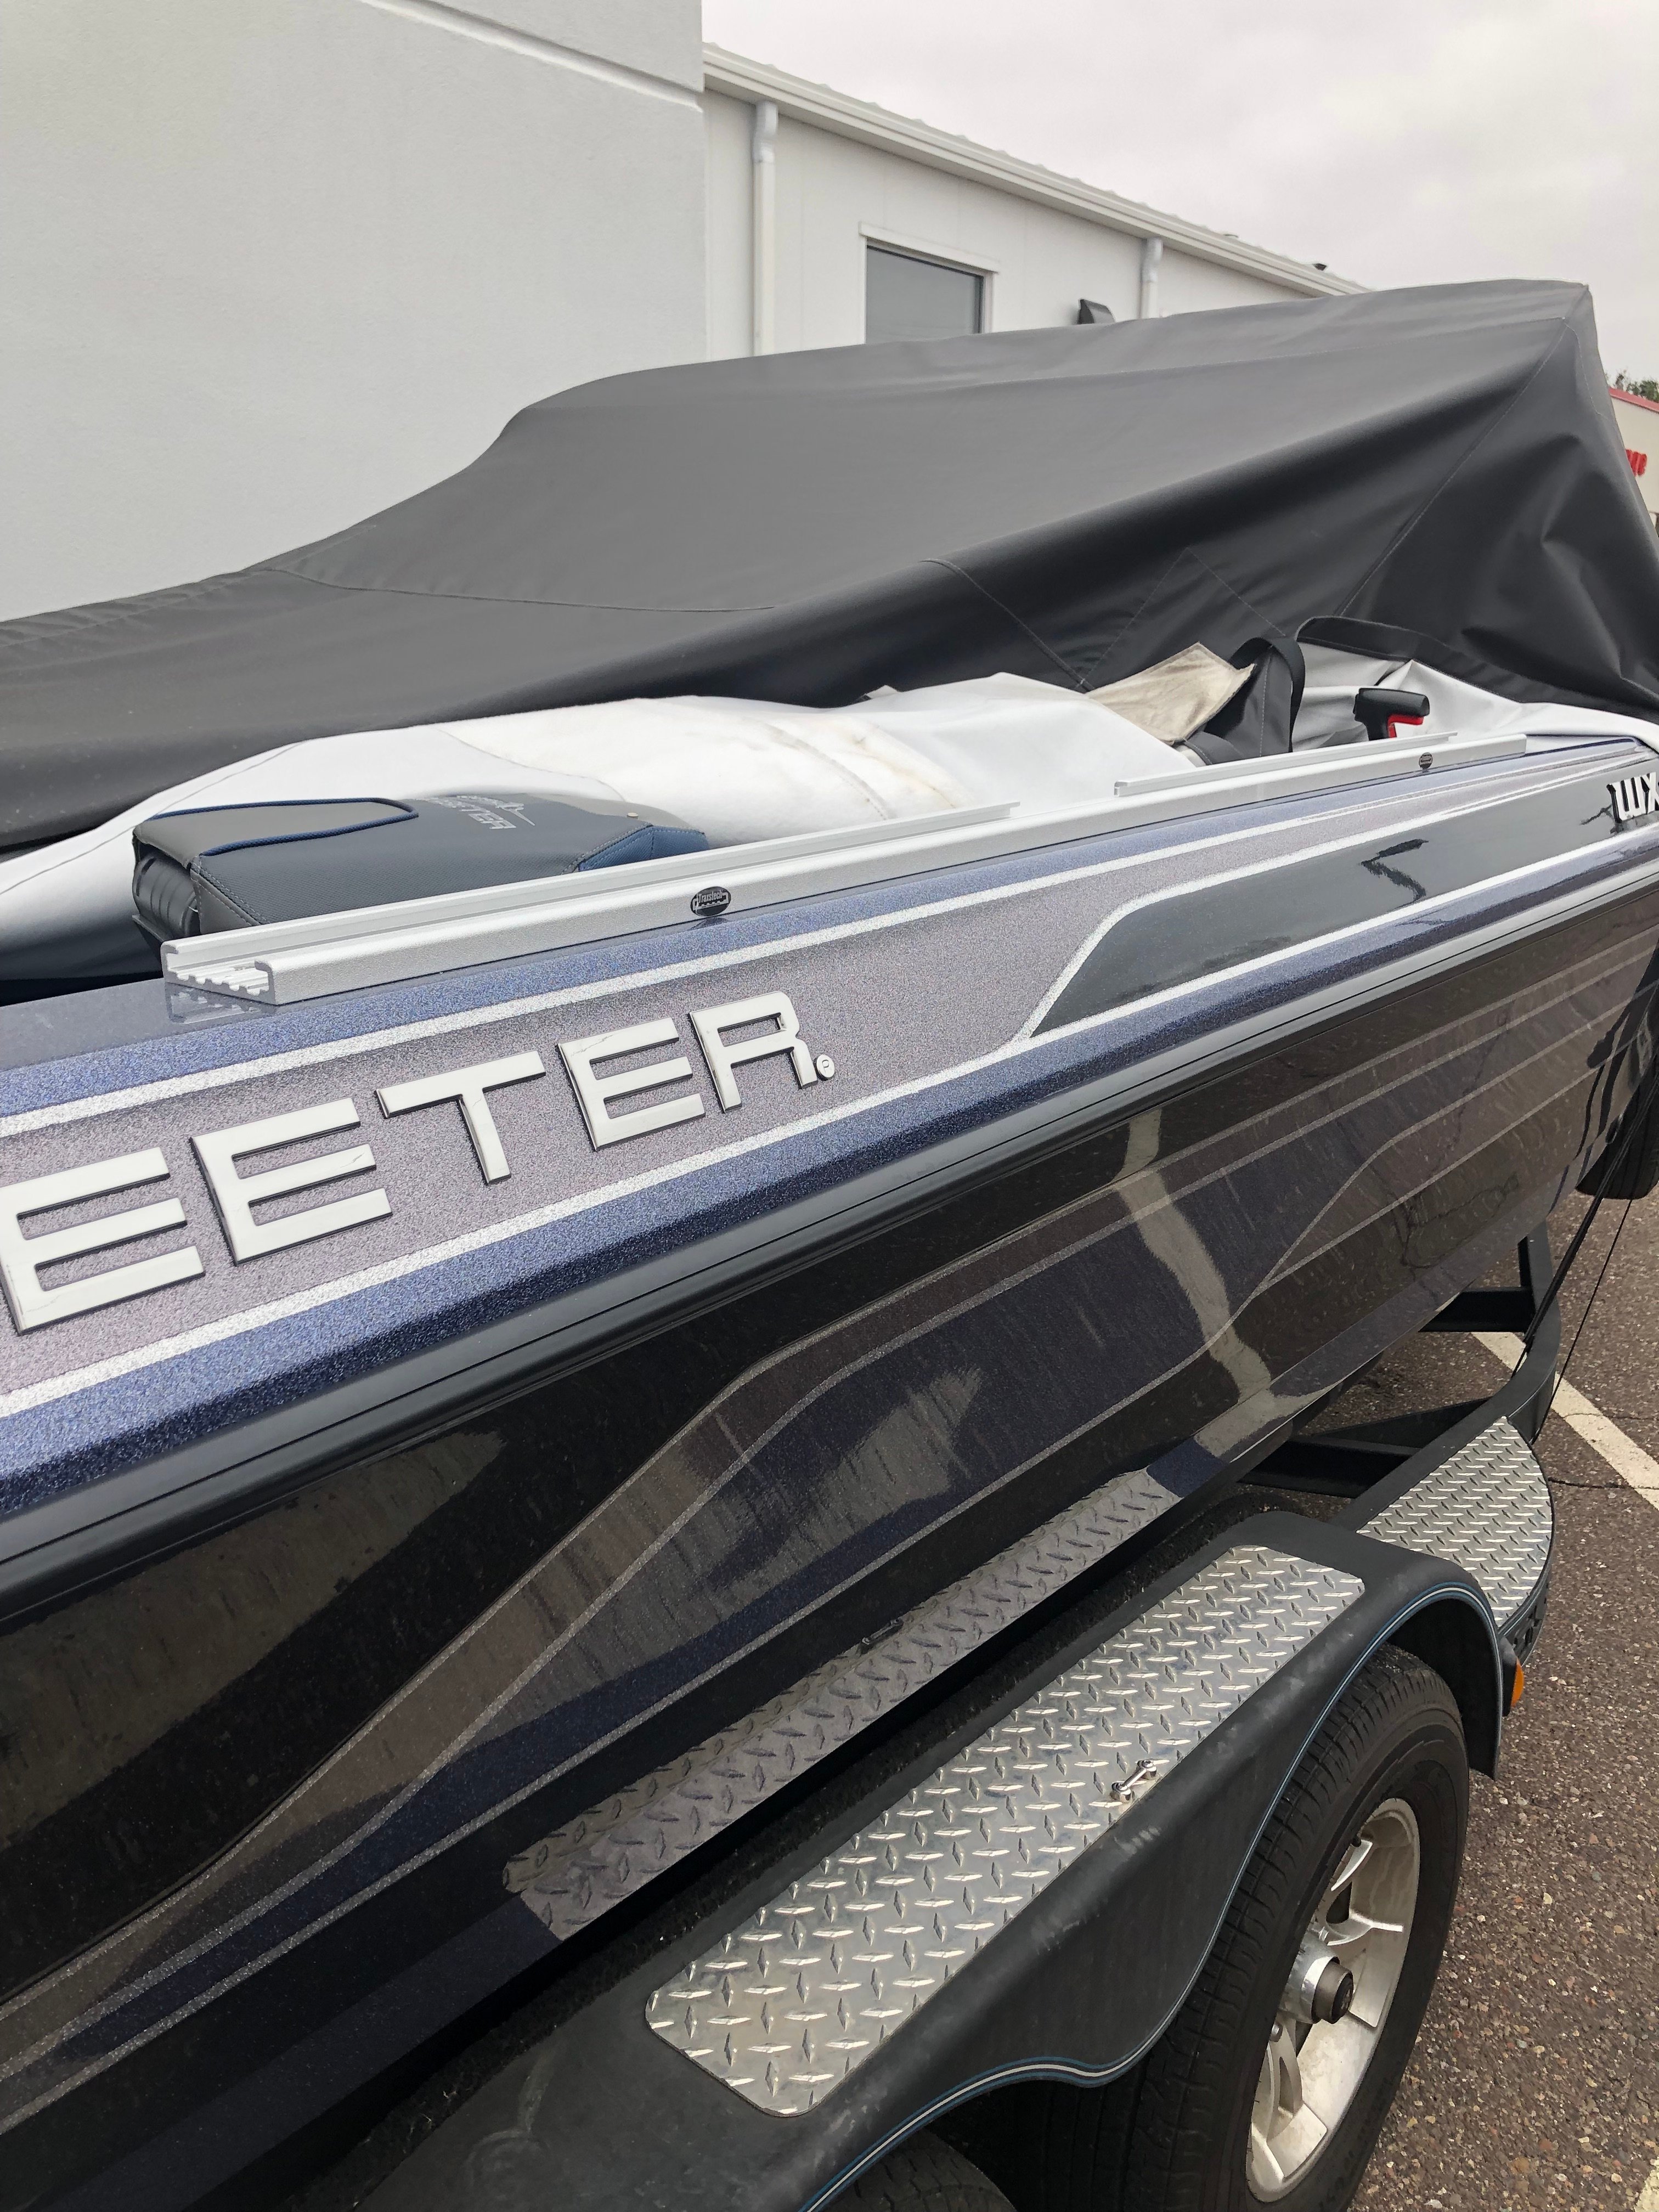 Track mounted rod holder recommendations for WX2060 - Skeeter Boats -  Skeeter Boats